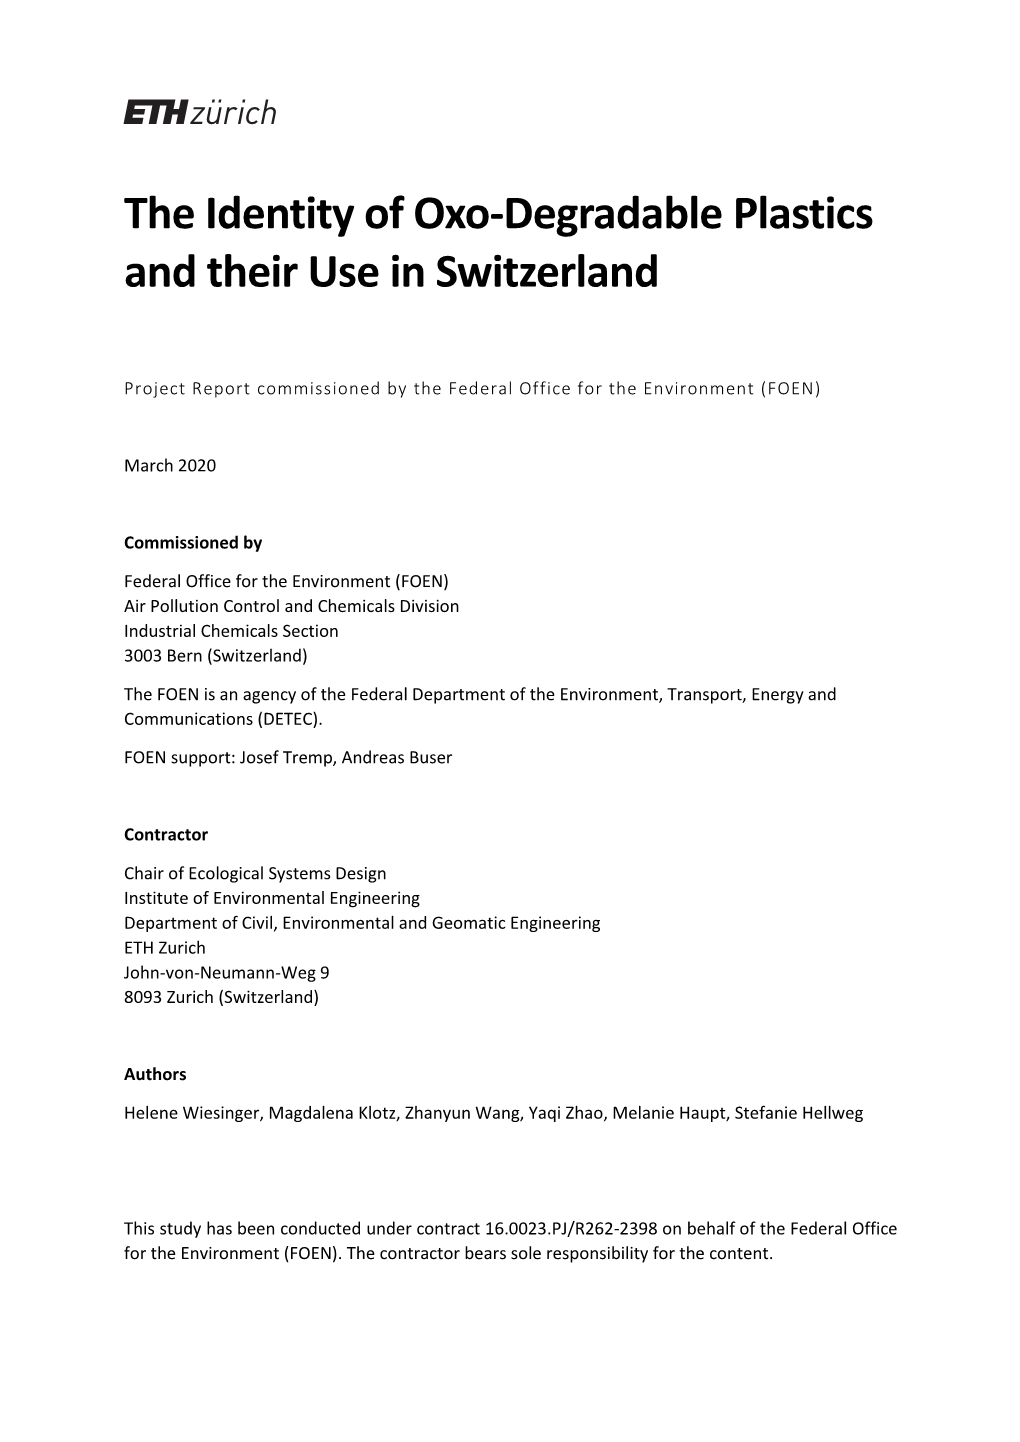 The Identity of Oxo-Degradable Plastics and Their Use in Switzerland